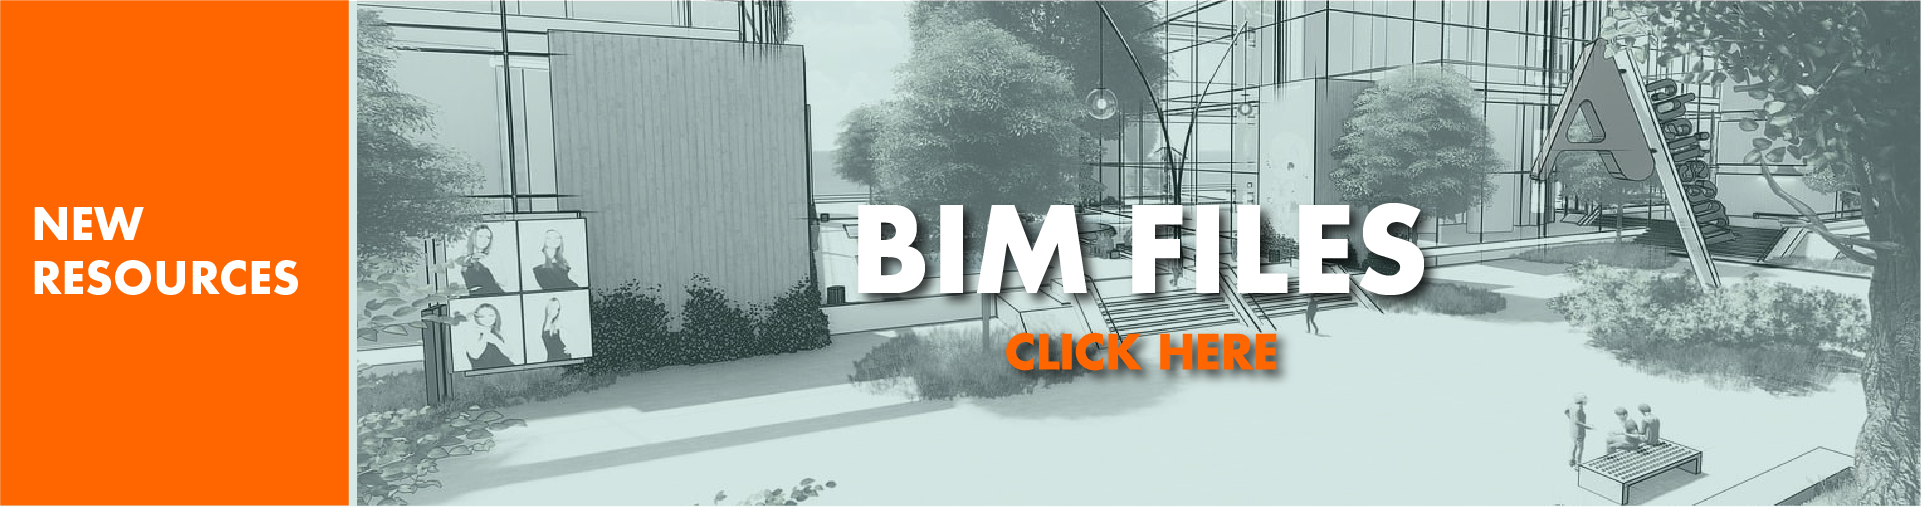 Banner Image with background illustration and BIM Files text